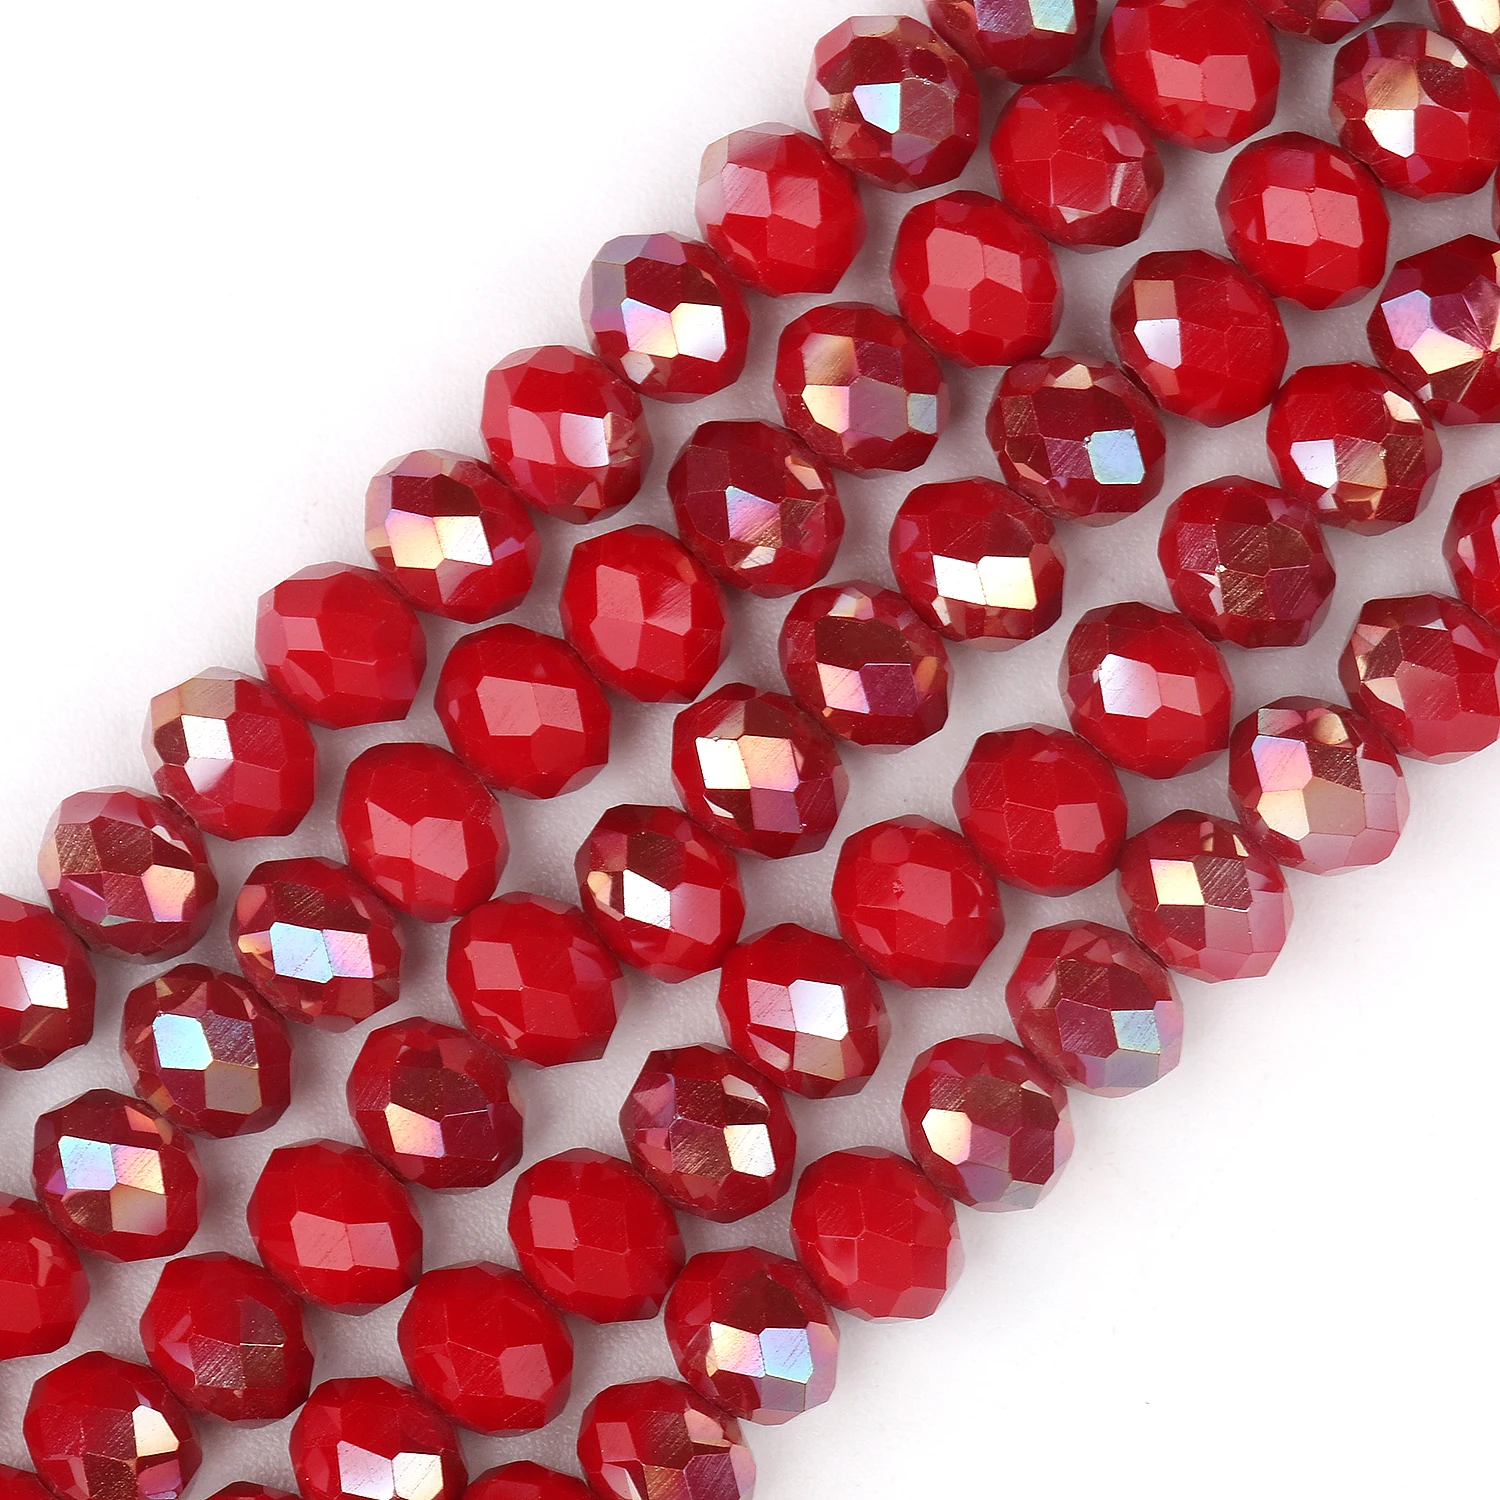 

Red Plated Austria Crystal Glass Bead Faceted Rondelle Loose Spacer Beads for Jewelry Making Diy Bracelet 15''Inches 3 4 6 8mm